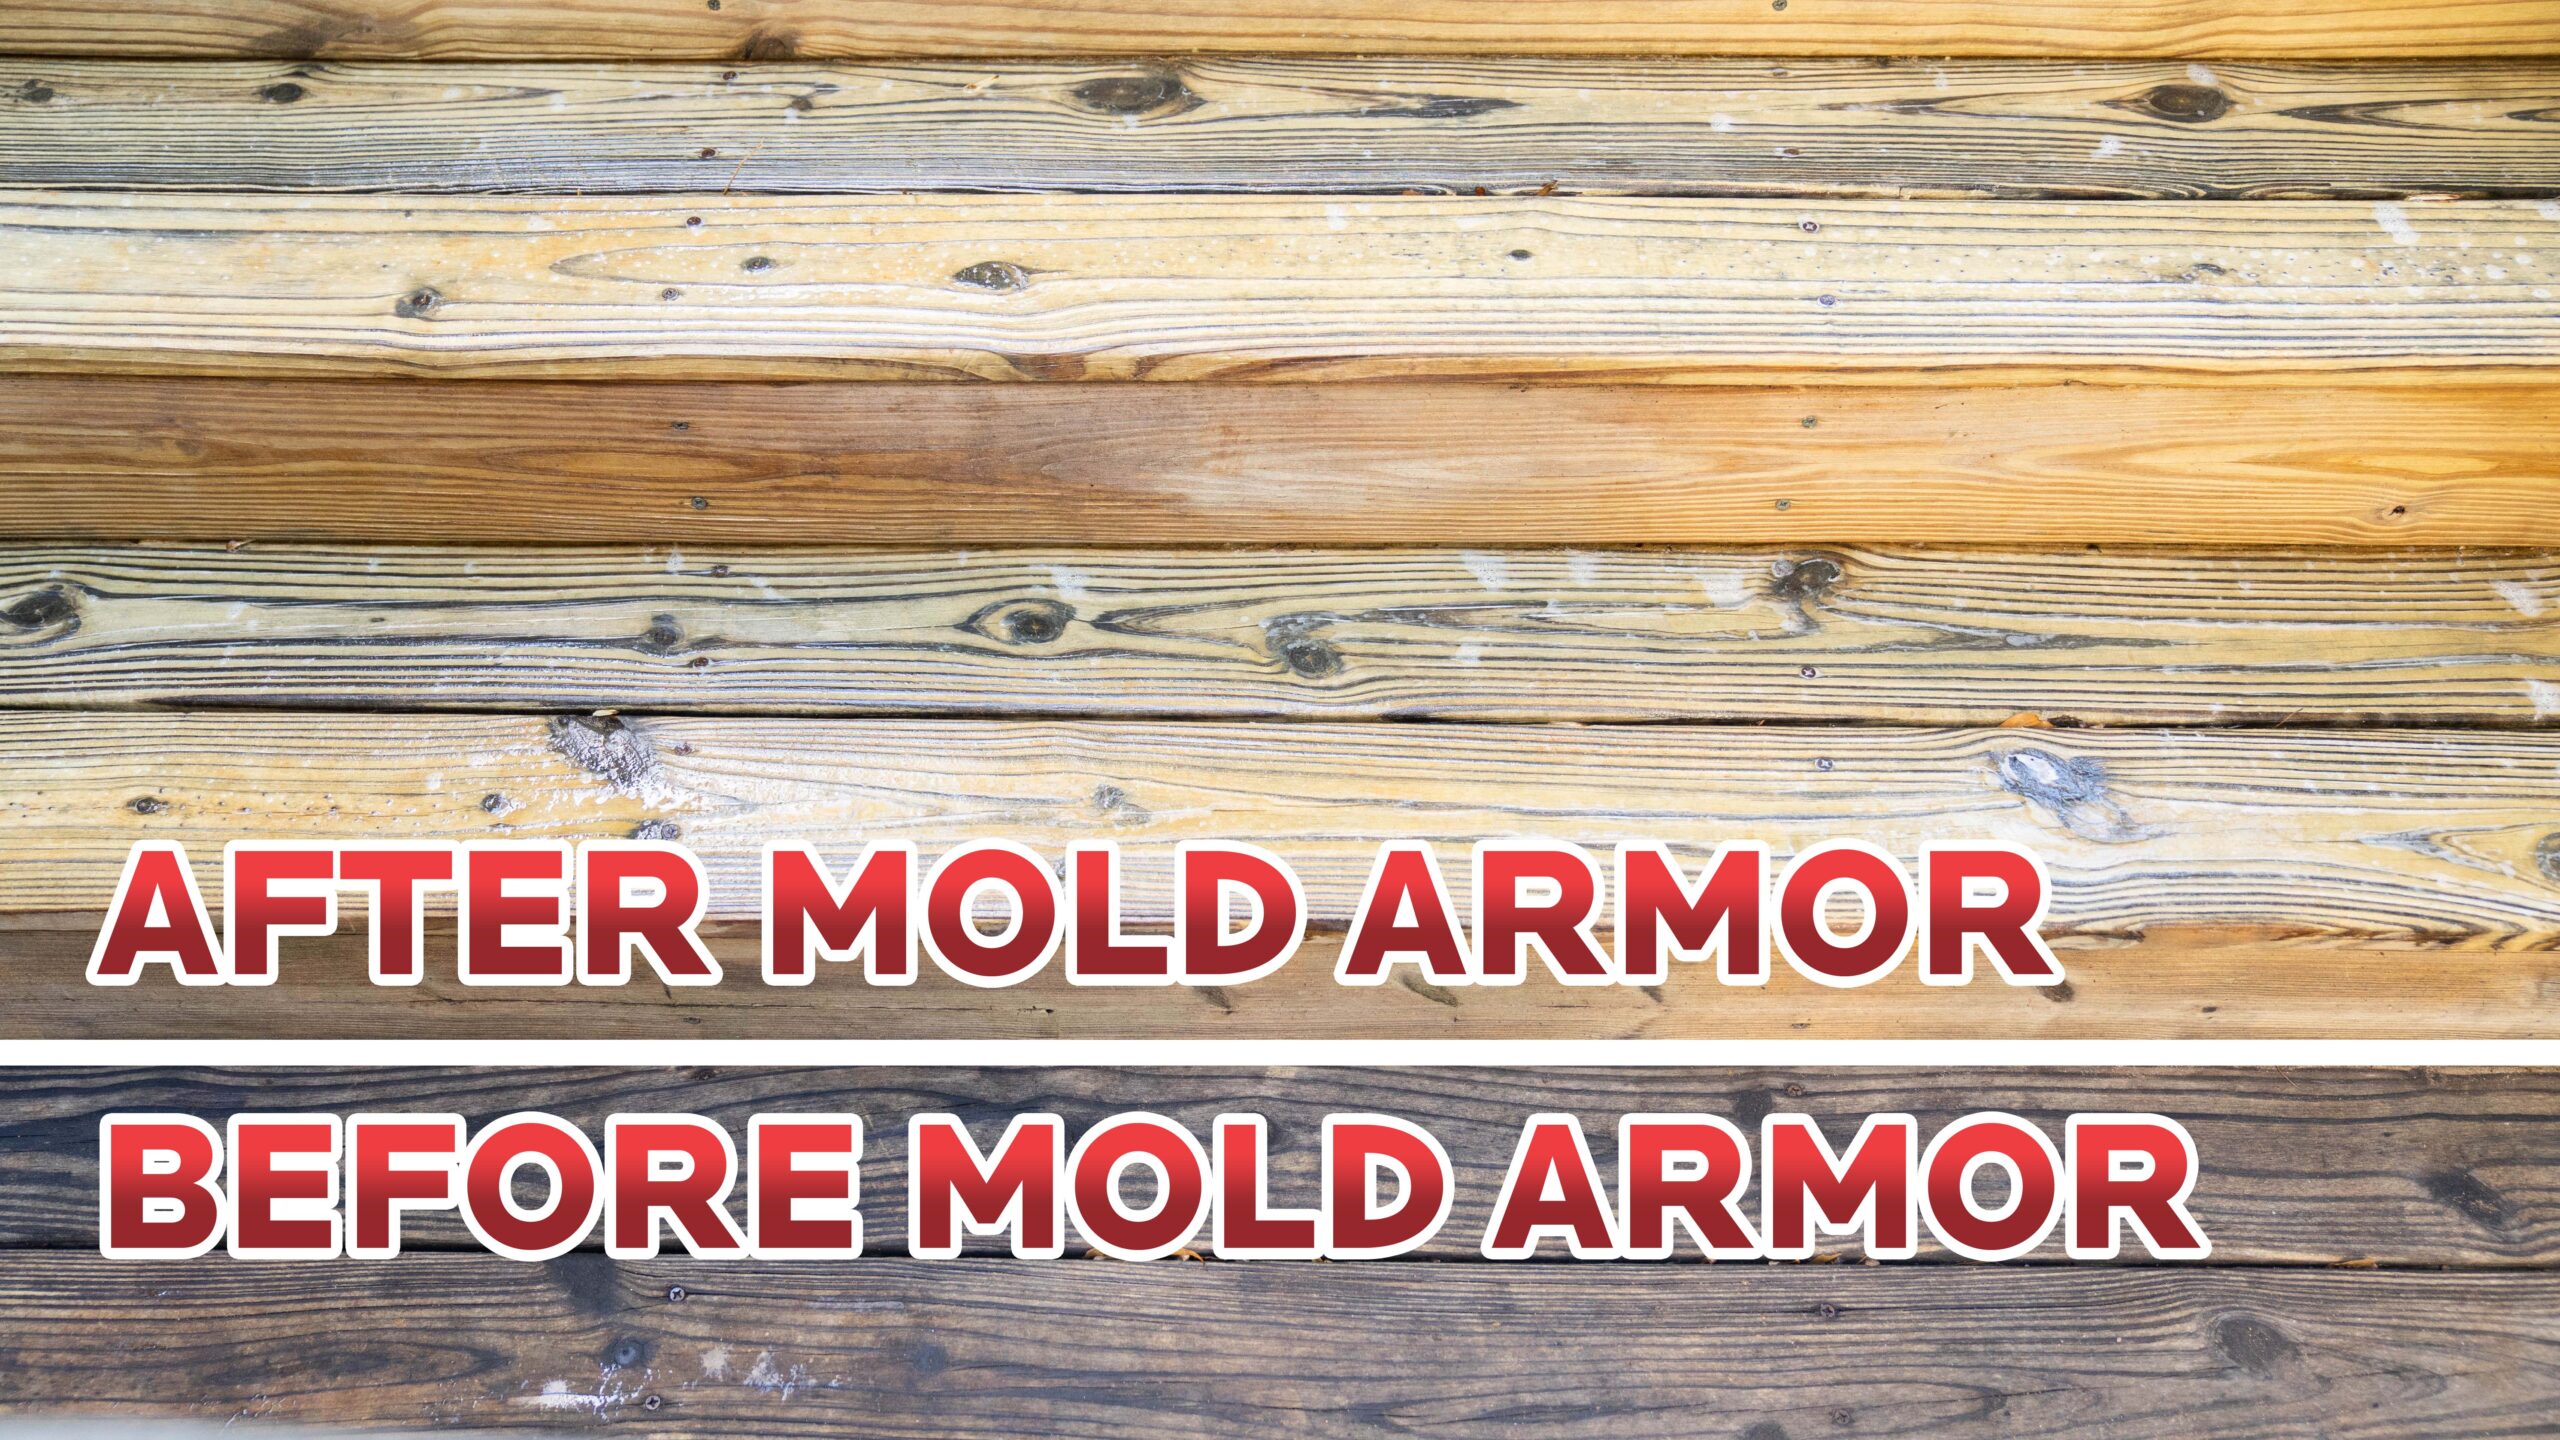 Mold Armor 64 oz. Deck Wash H/E at Tractor Supply Co.